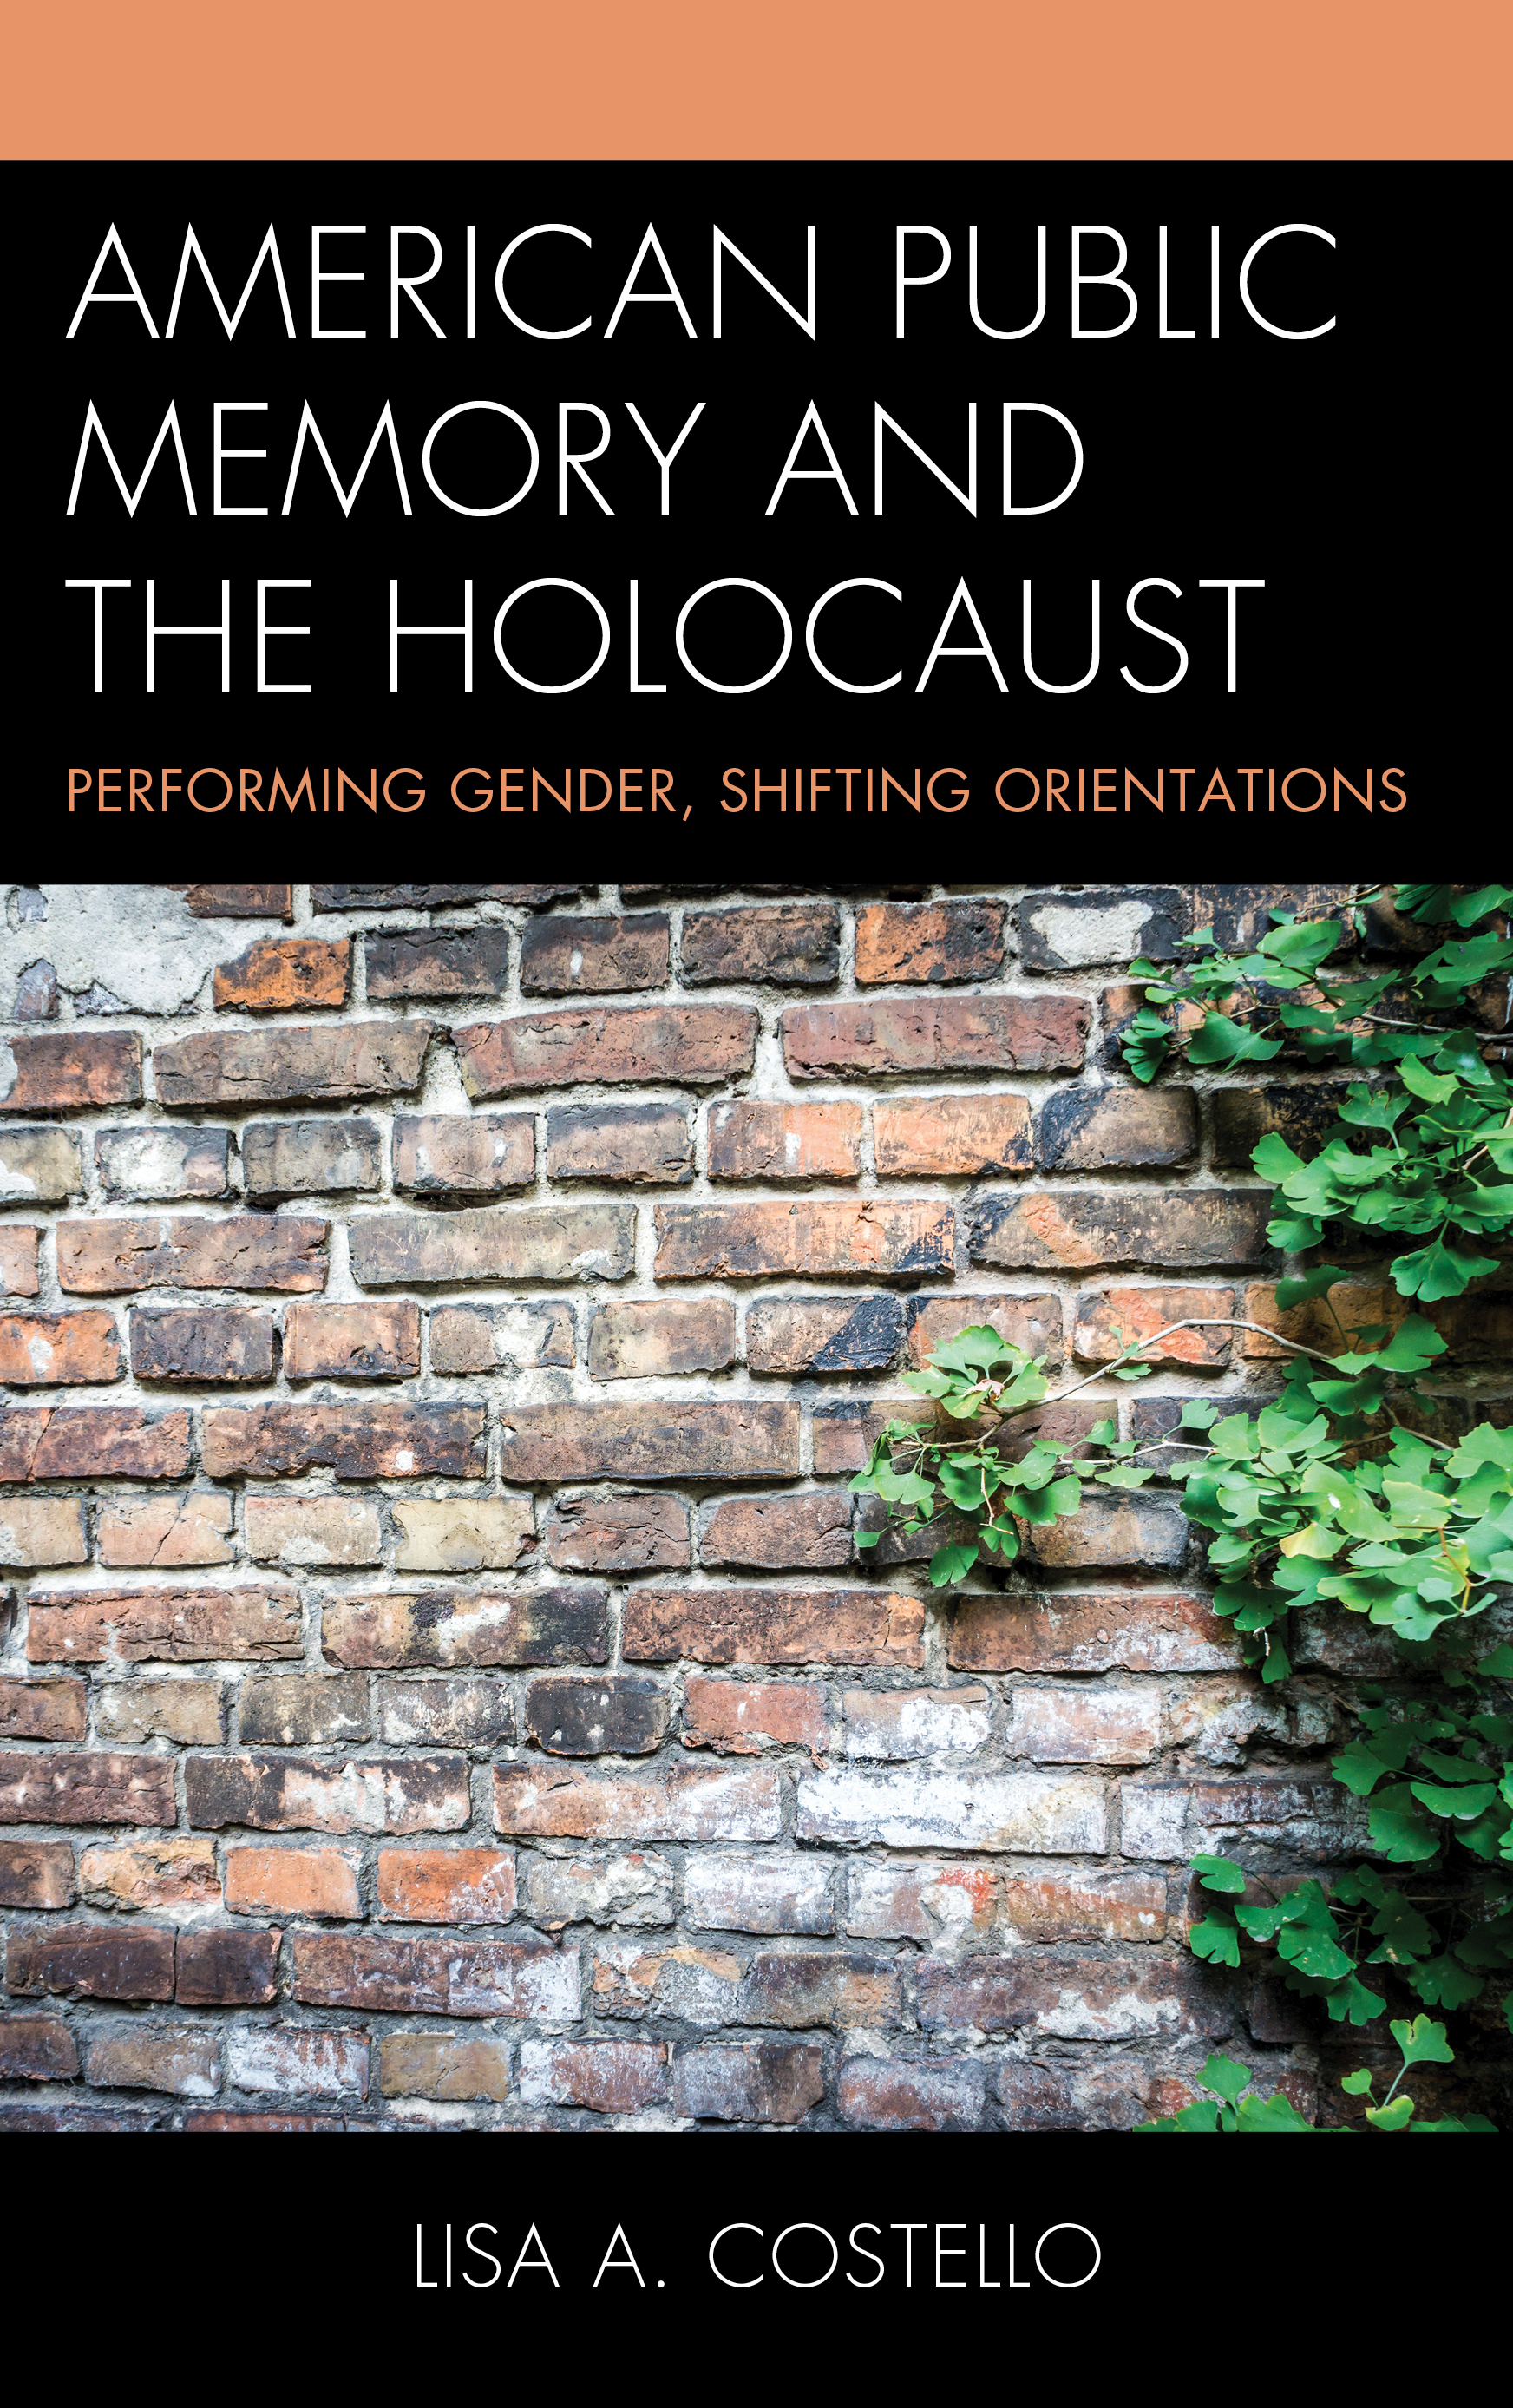 American Public Memory and the Holocaust: Performing Gender, Shifting Orientations